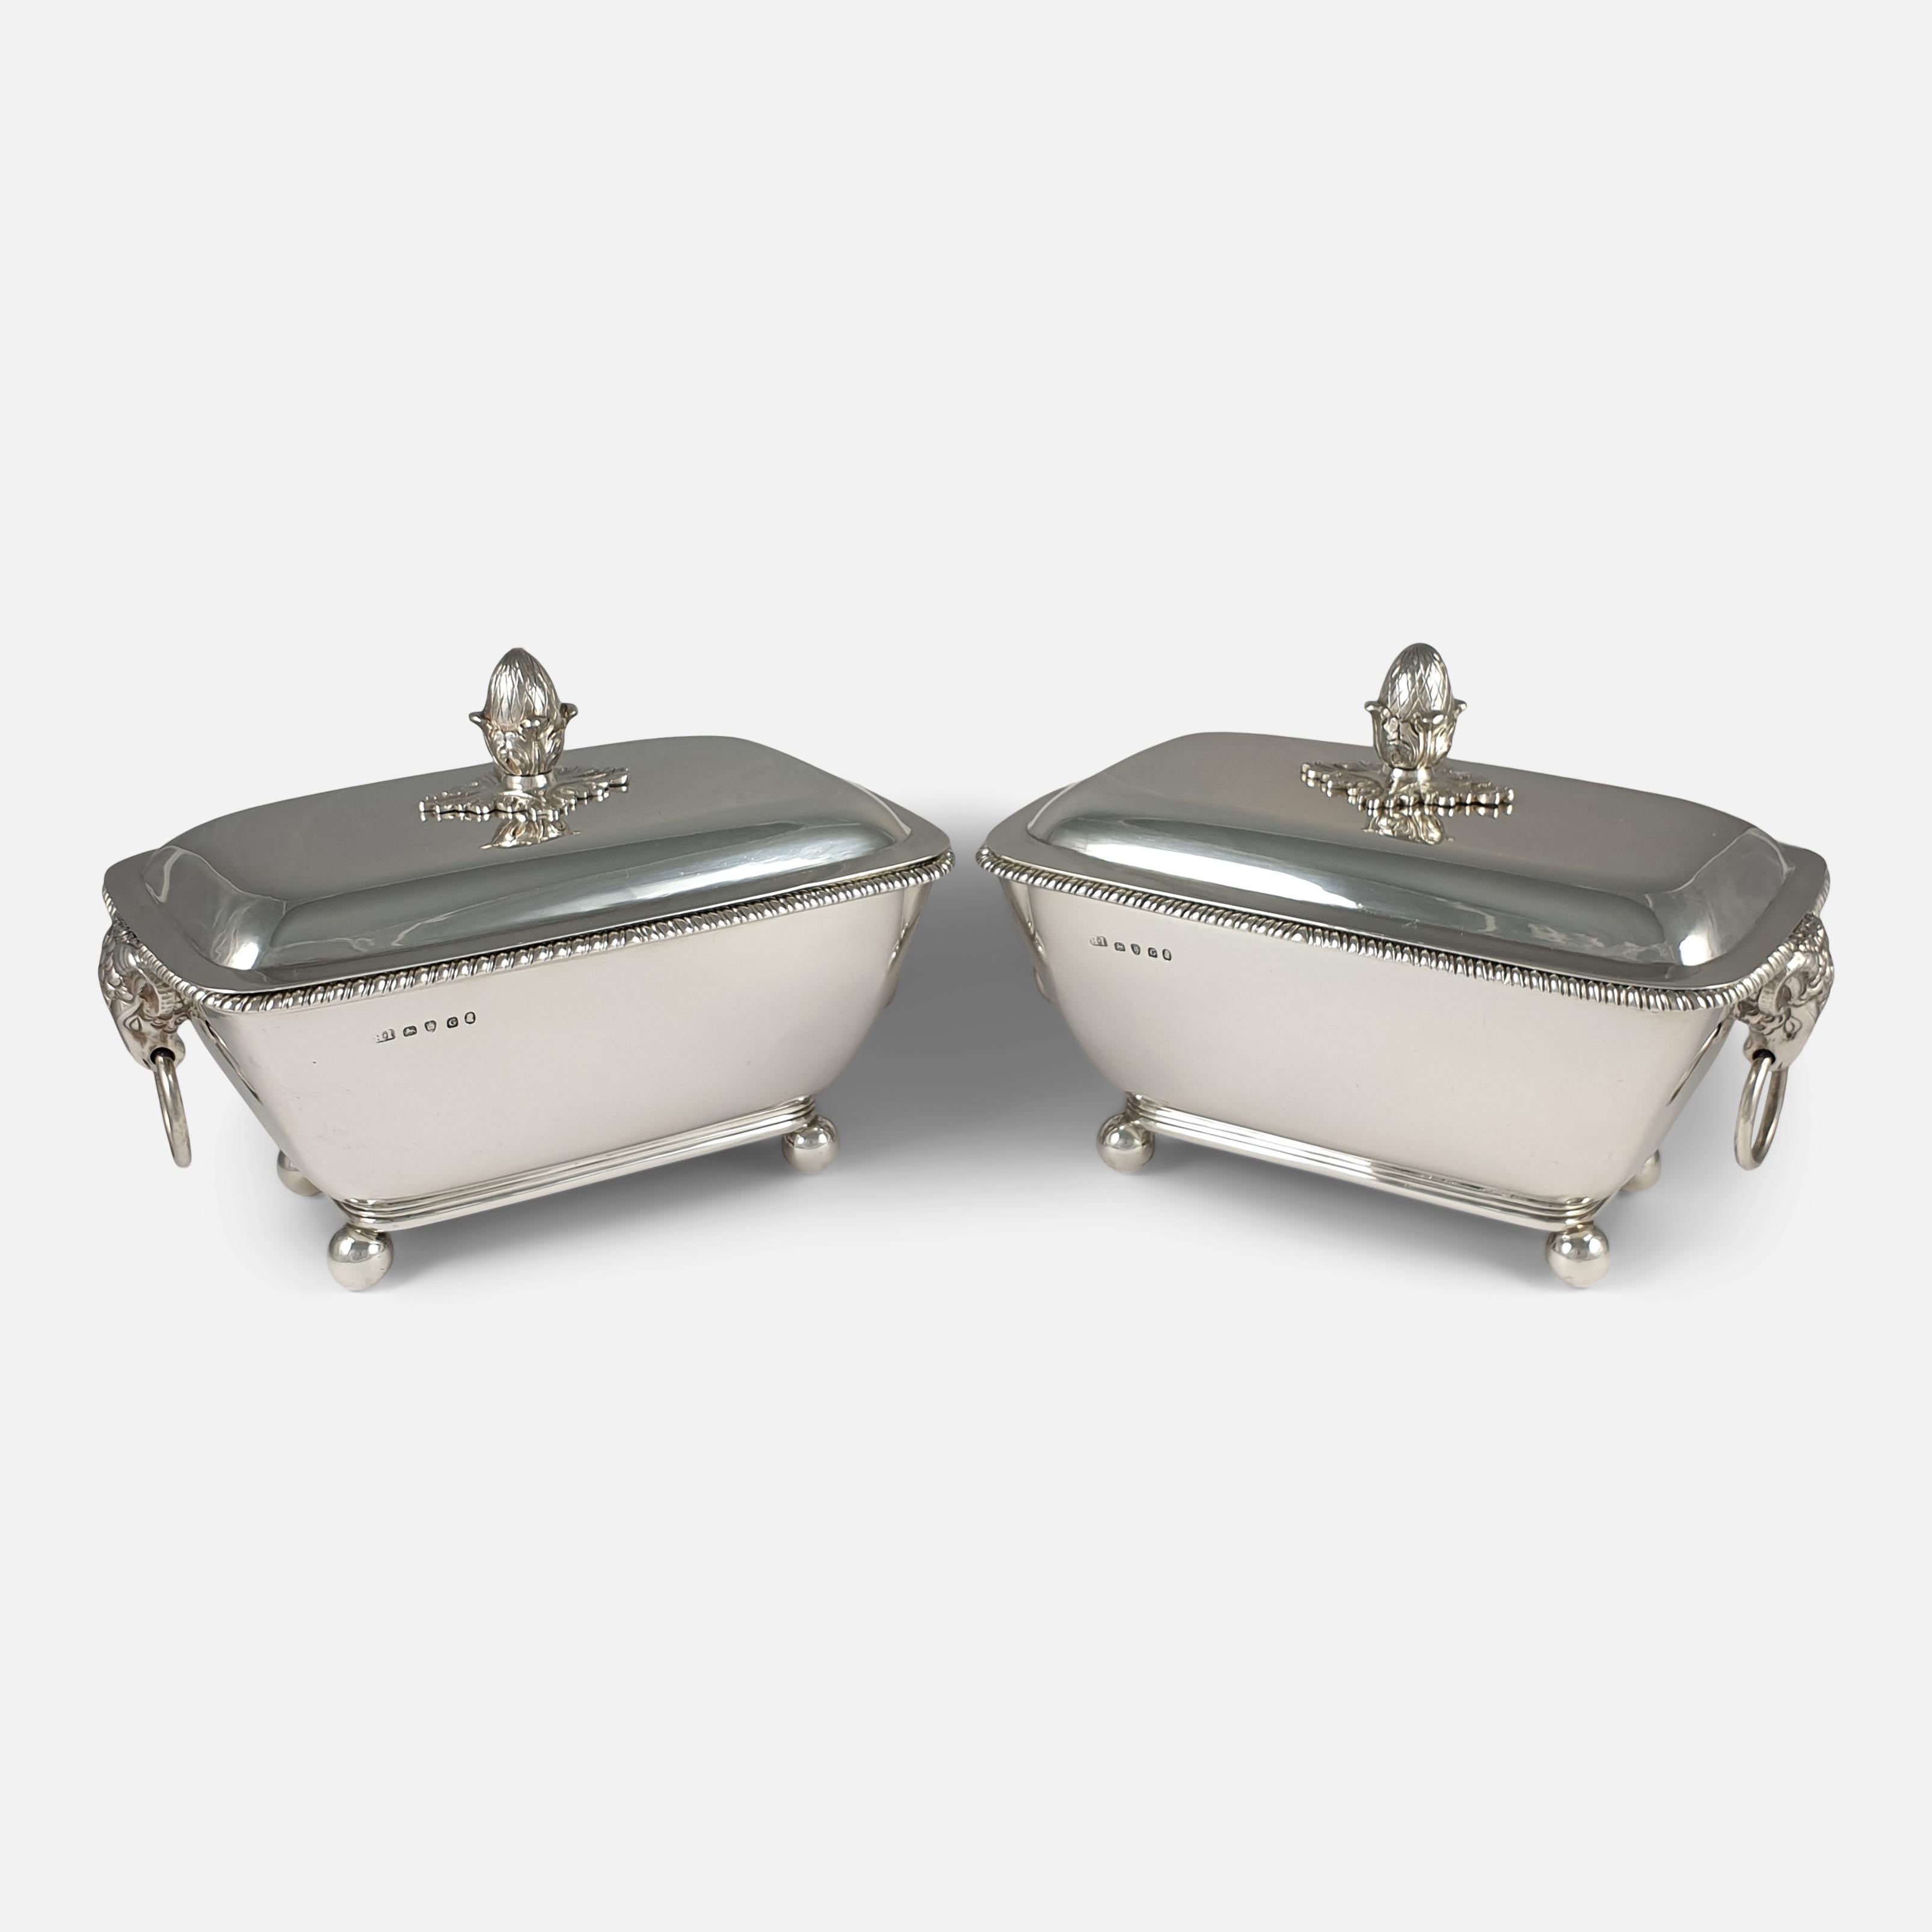 Pair of George III Silver Sauce Tureens and Covers, John Robins, London, 1802 For Sale 3